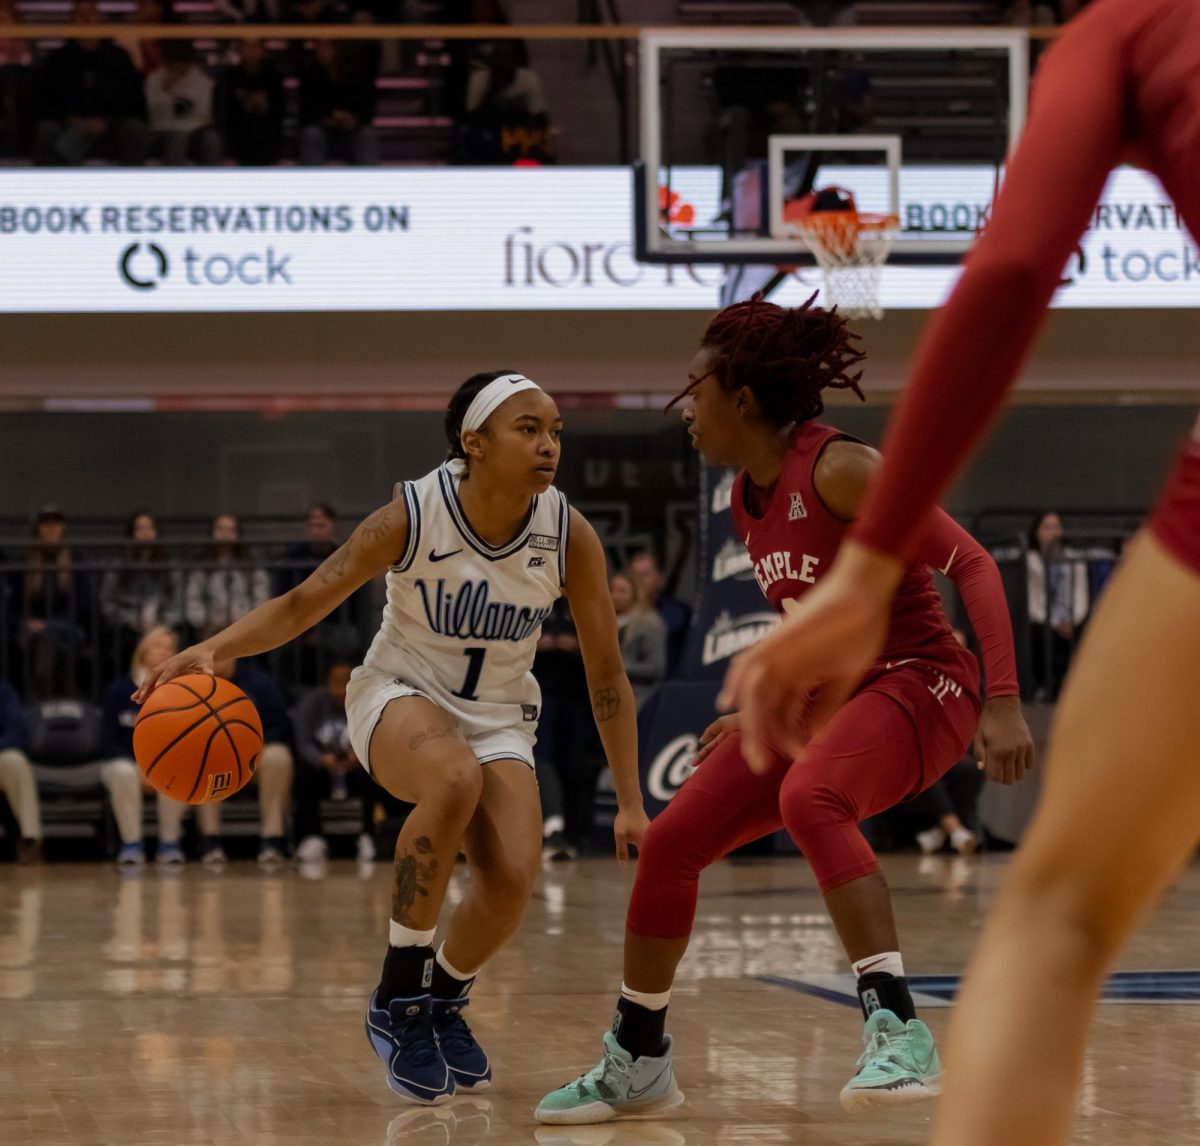 Junior guard Zanai Jones scored eight points and recorded three assists in the win over Penn.